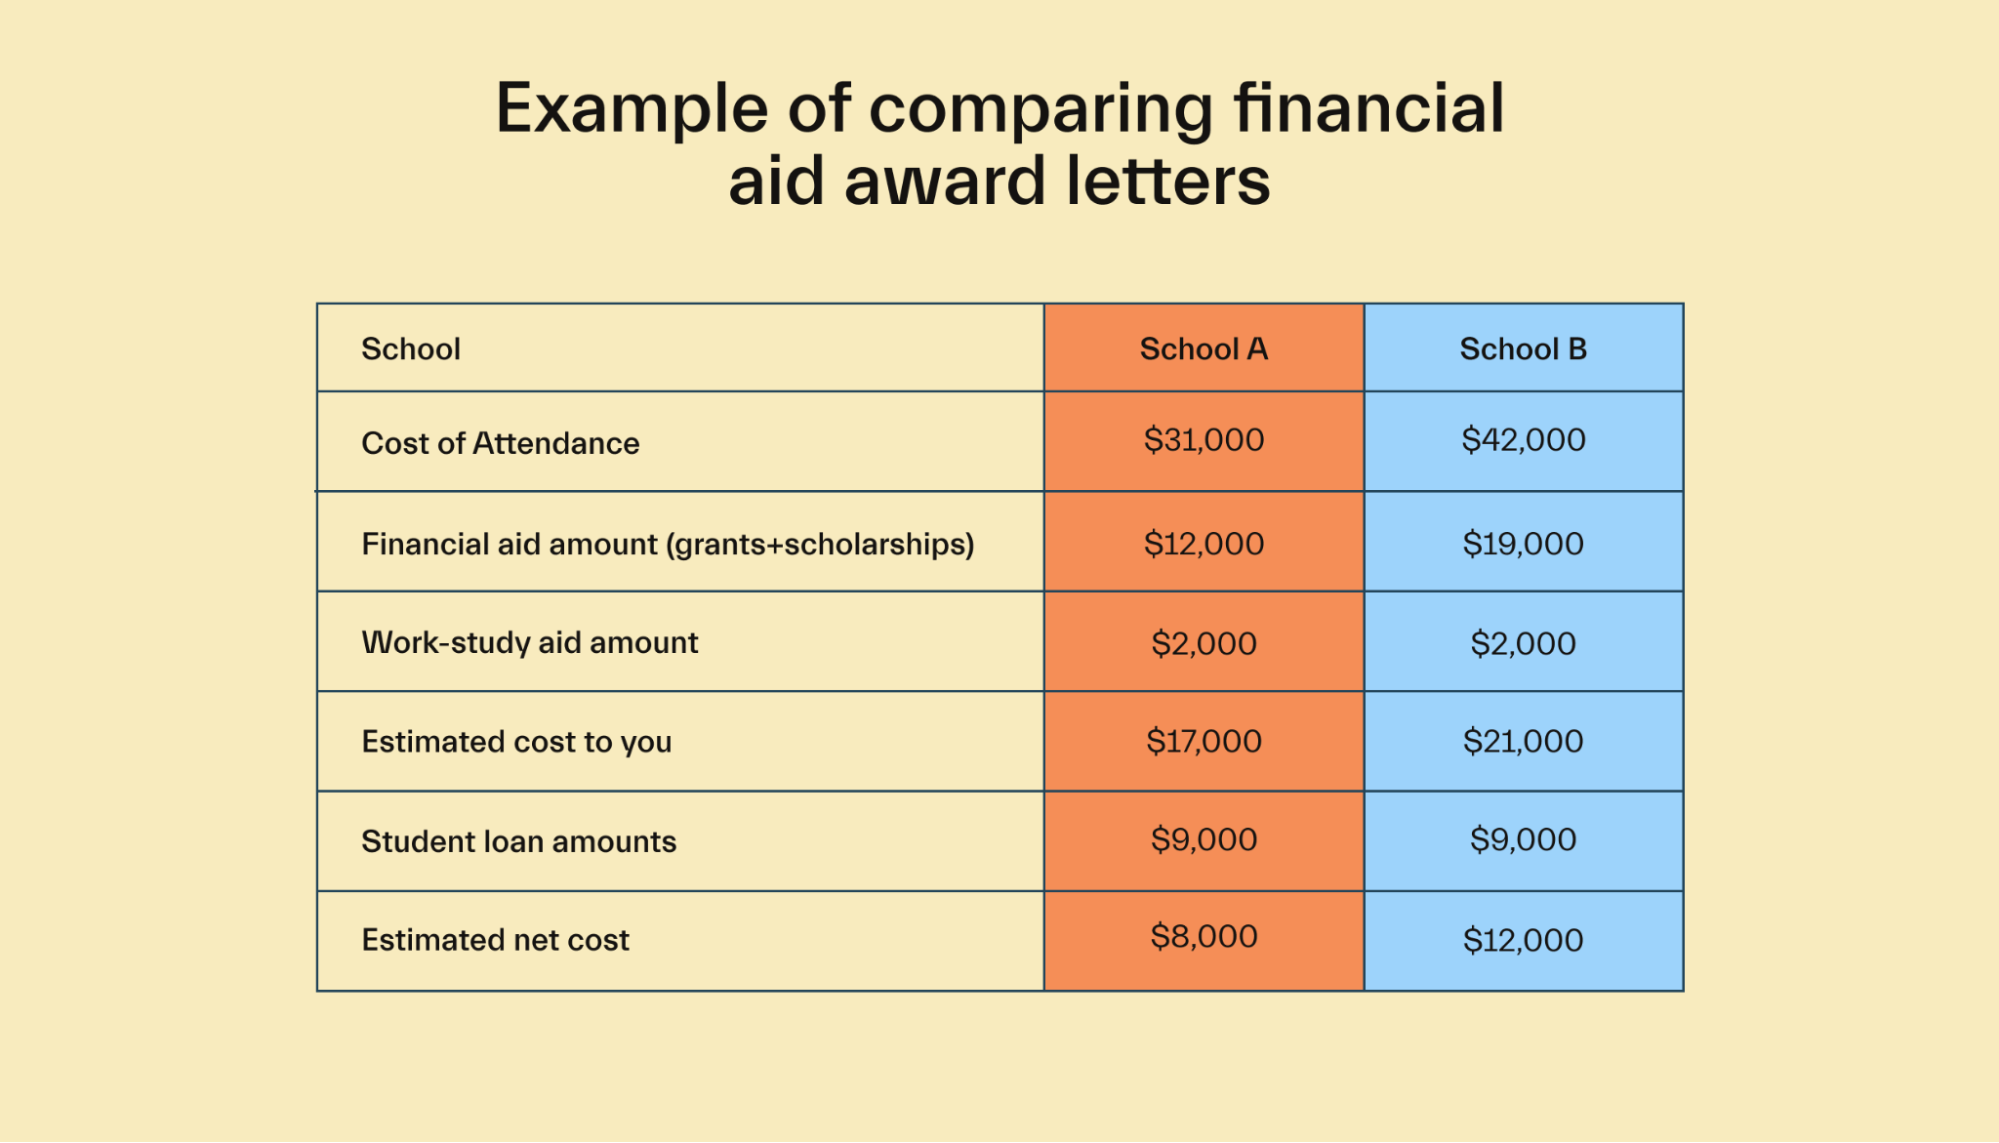 Example of comparing financial aid award letters